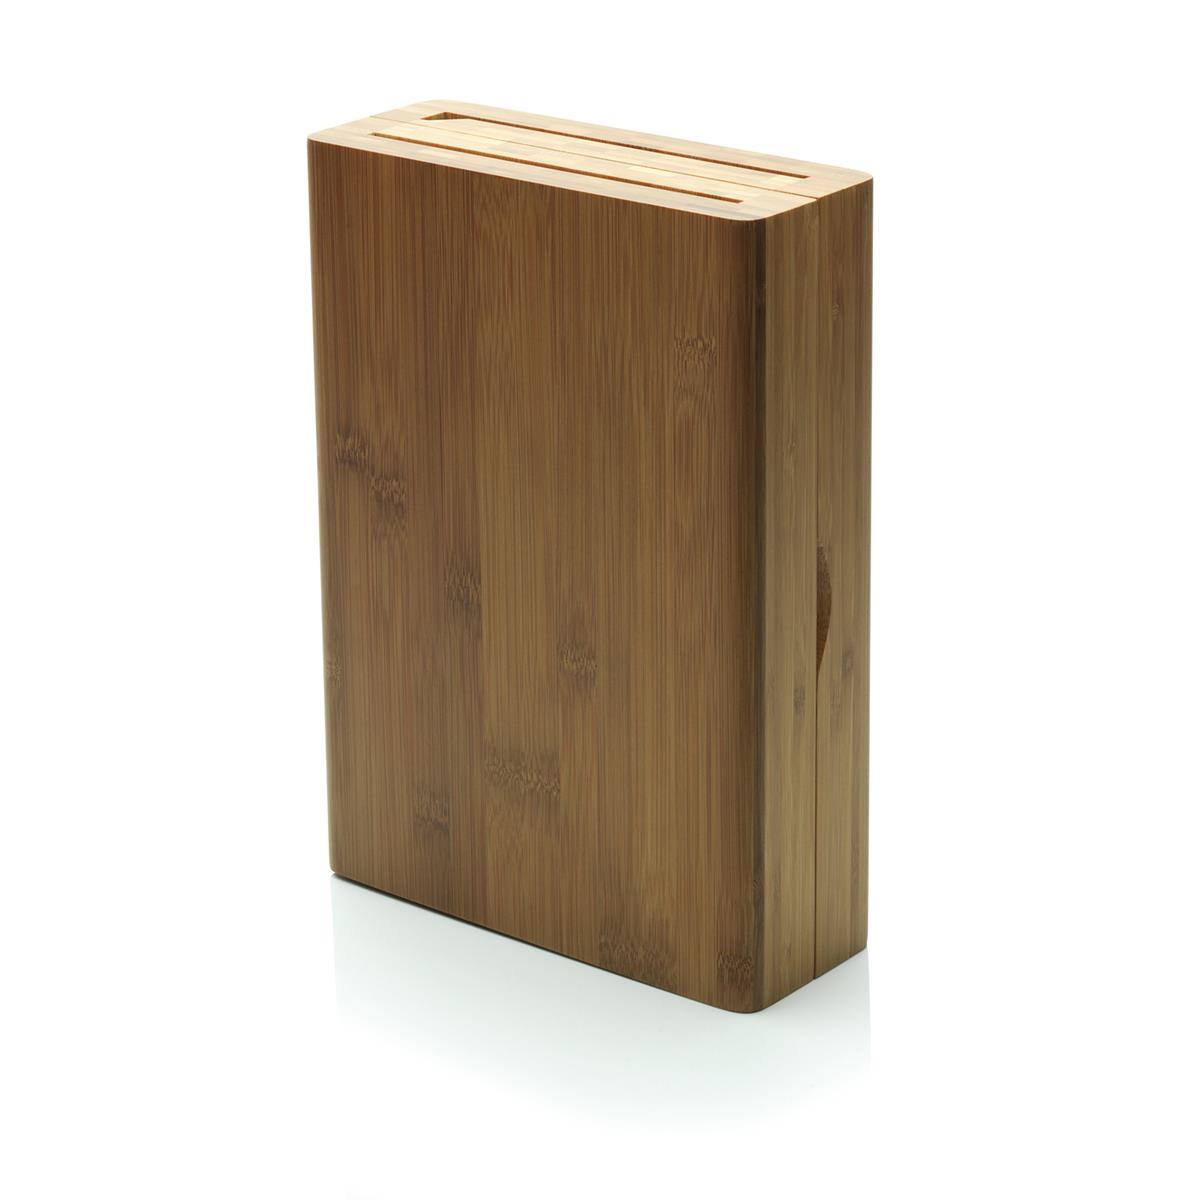 photo k-block knife block in bamboo wood¹ with book-like opening